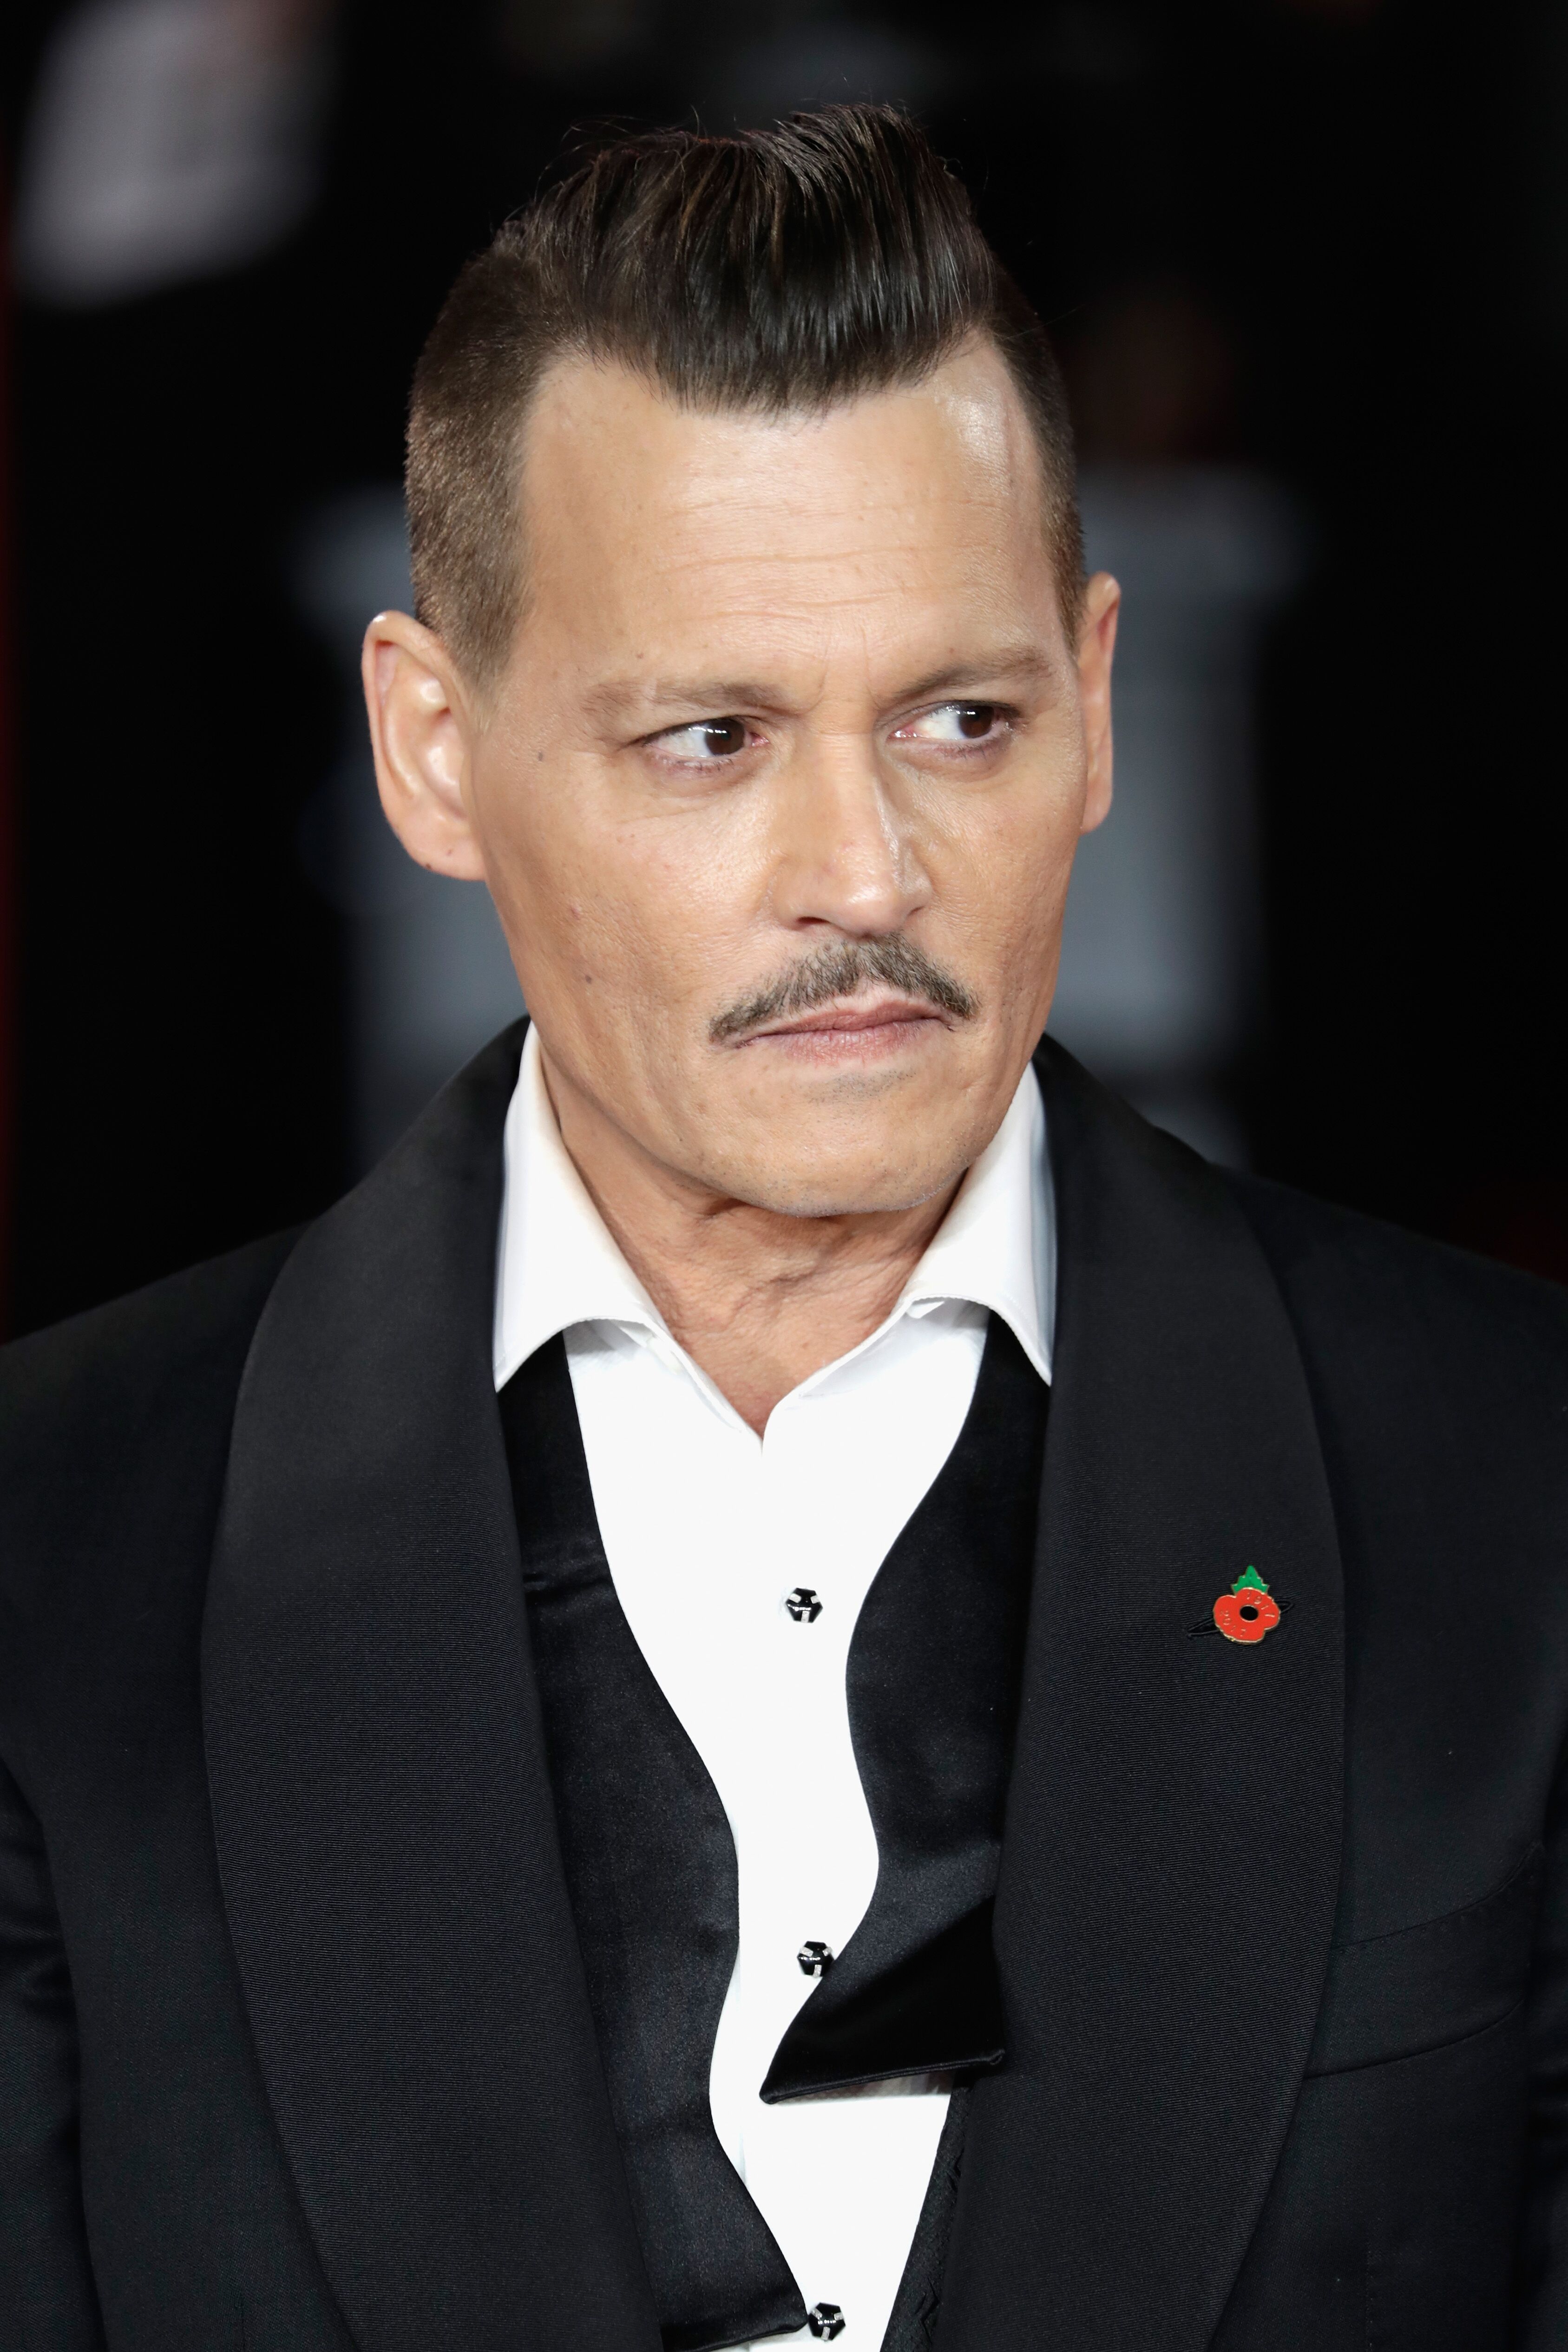 Johnny Depp attends the "Murder On The Orient Express' World Premiere." | Source: Getty Images